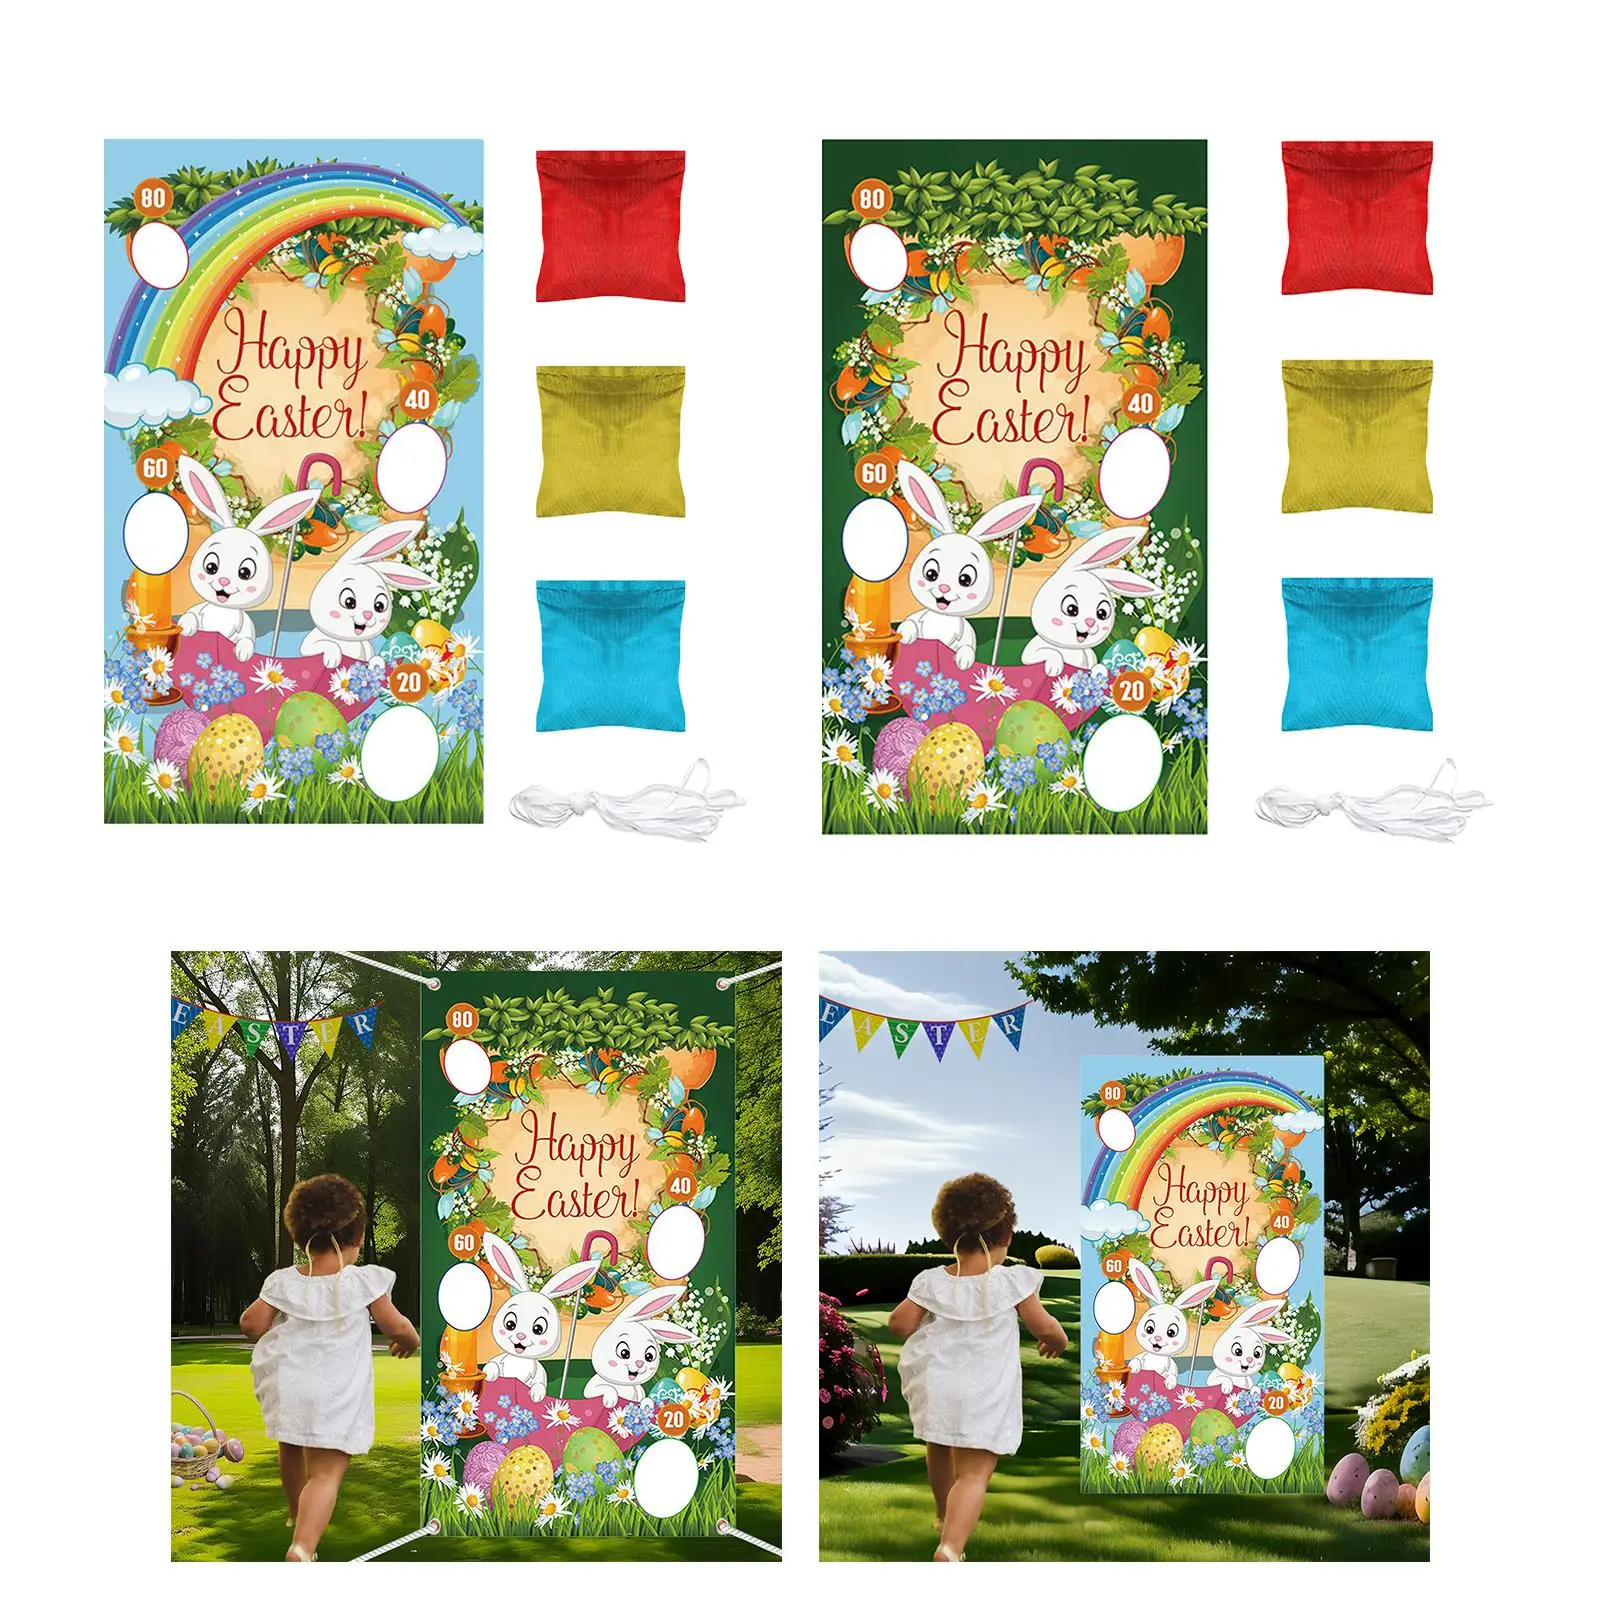 Toss Game Banner Party Favors Toys for Kids Adults Bunny Toss Games for Camping Games Birthday Gift Picnics Reusable Play Time